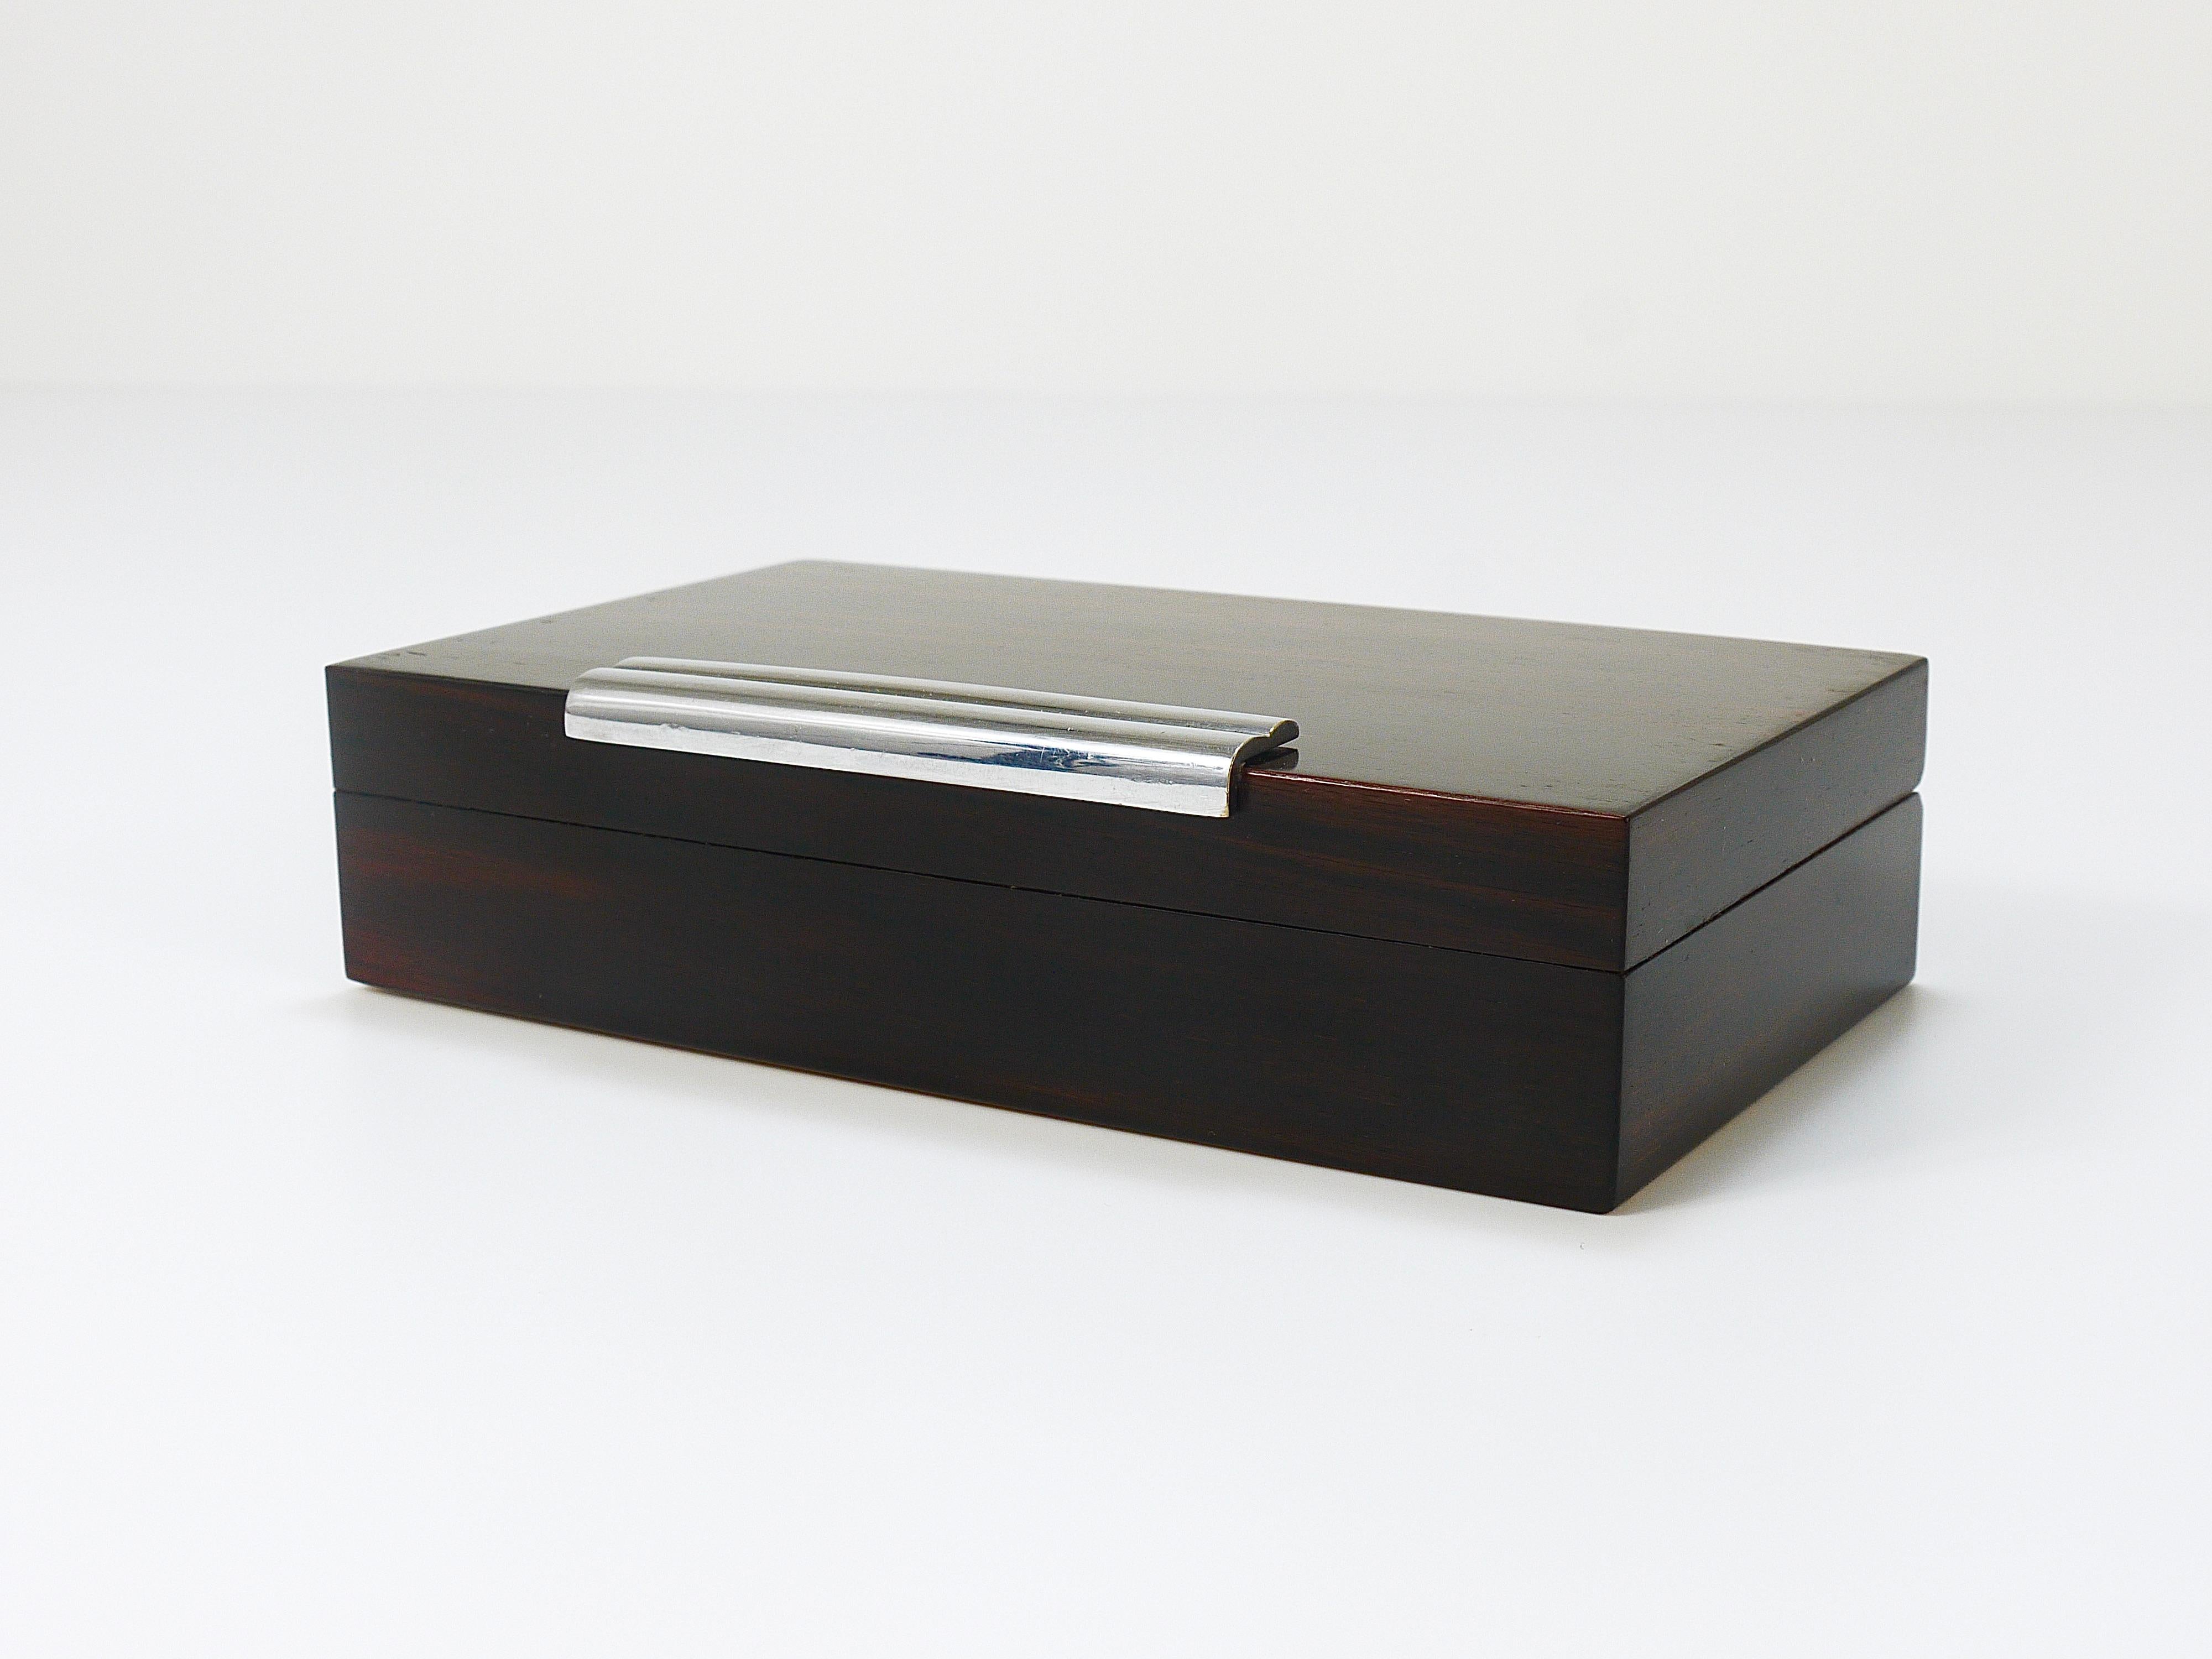 Mid-20th Century French Art Deco Rosewood & Nickel Storage Box, Maison Desny Style, France, 1930s For Sale